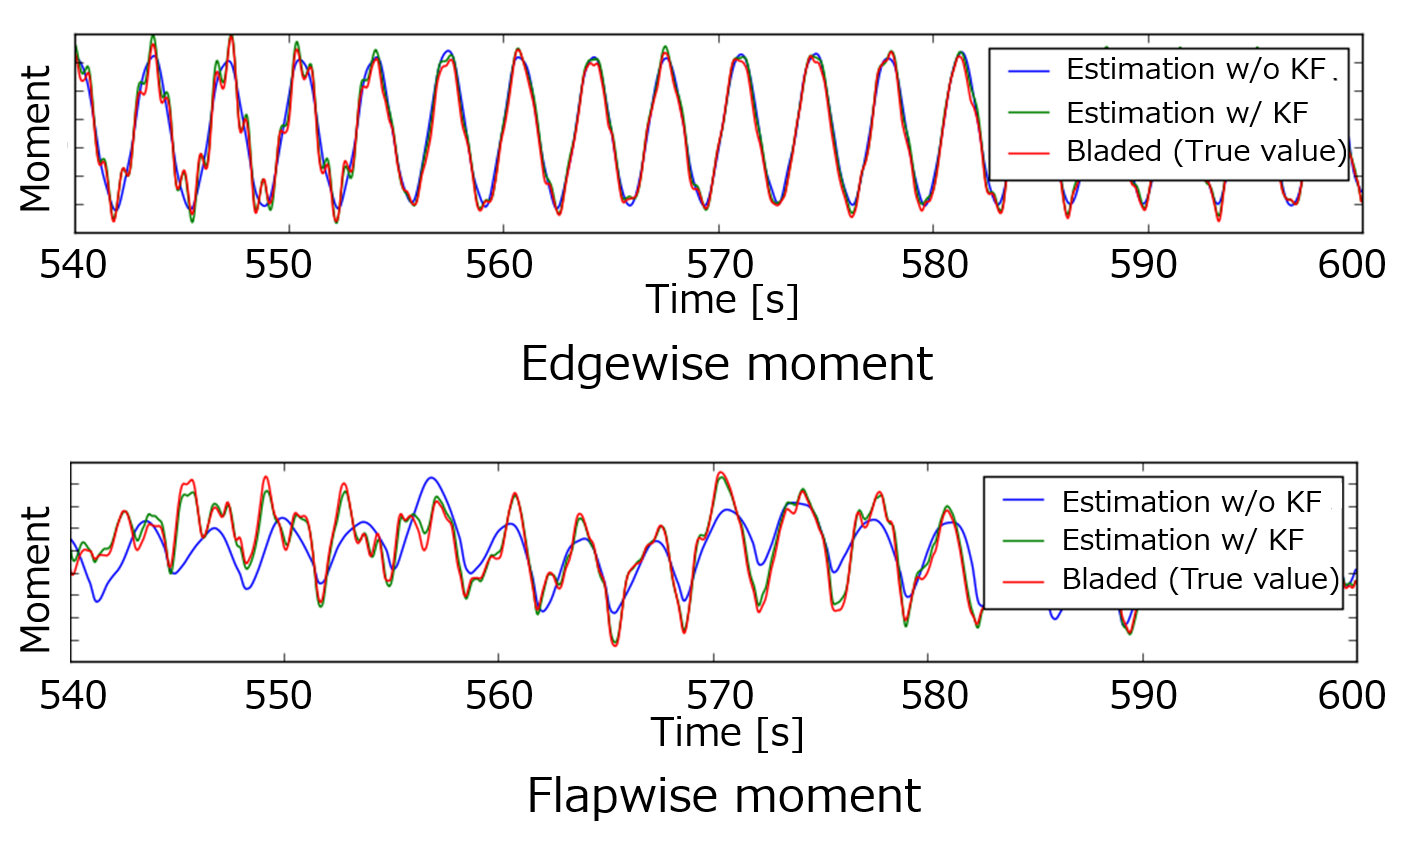 Figure 2: Time series data of edgewise bending moment and flapwise bending moment at a 15.0 m/s wind speed.